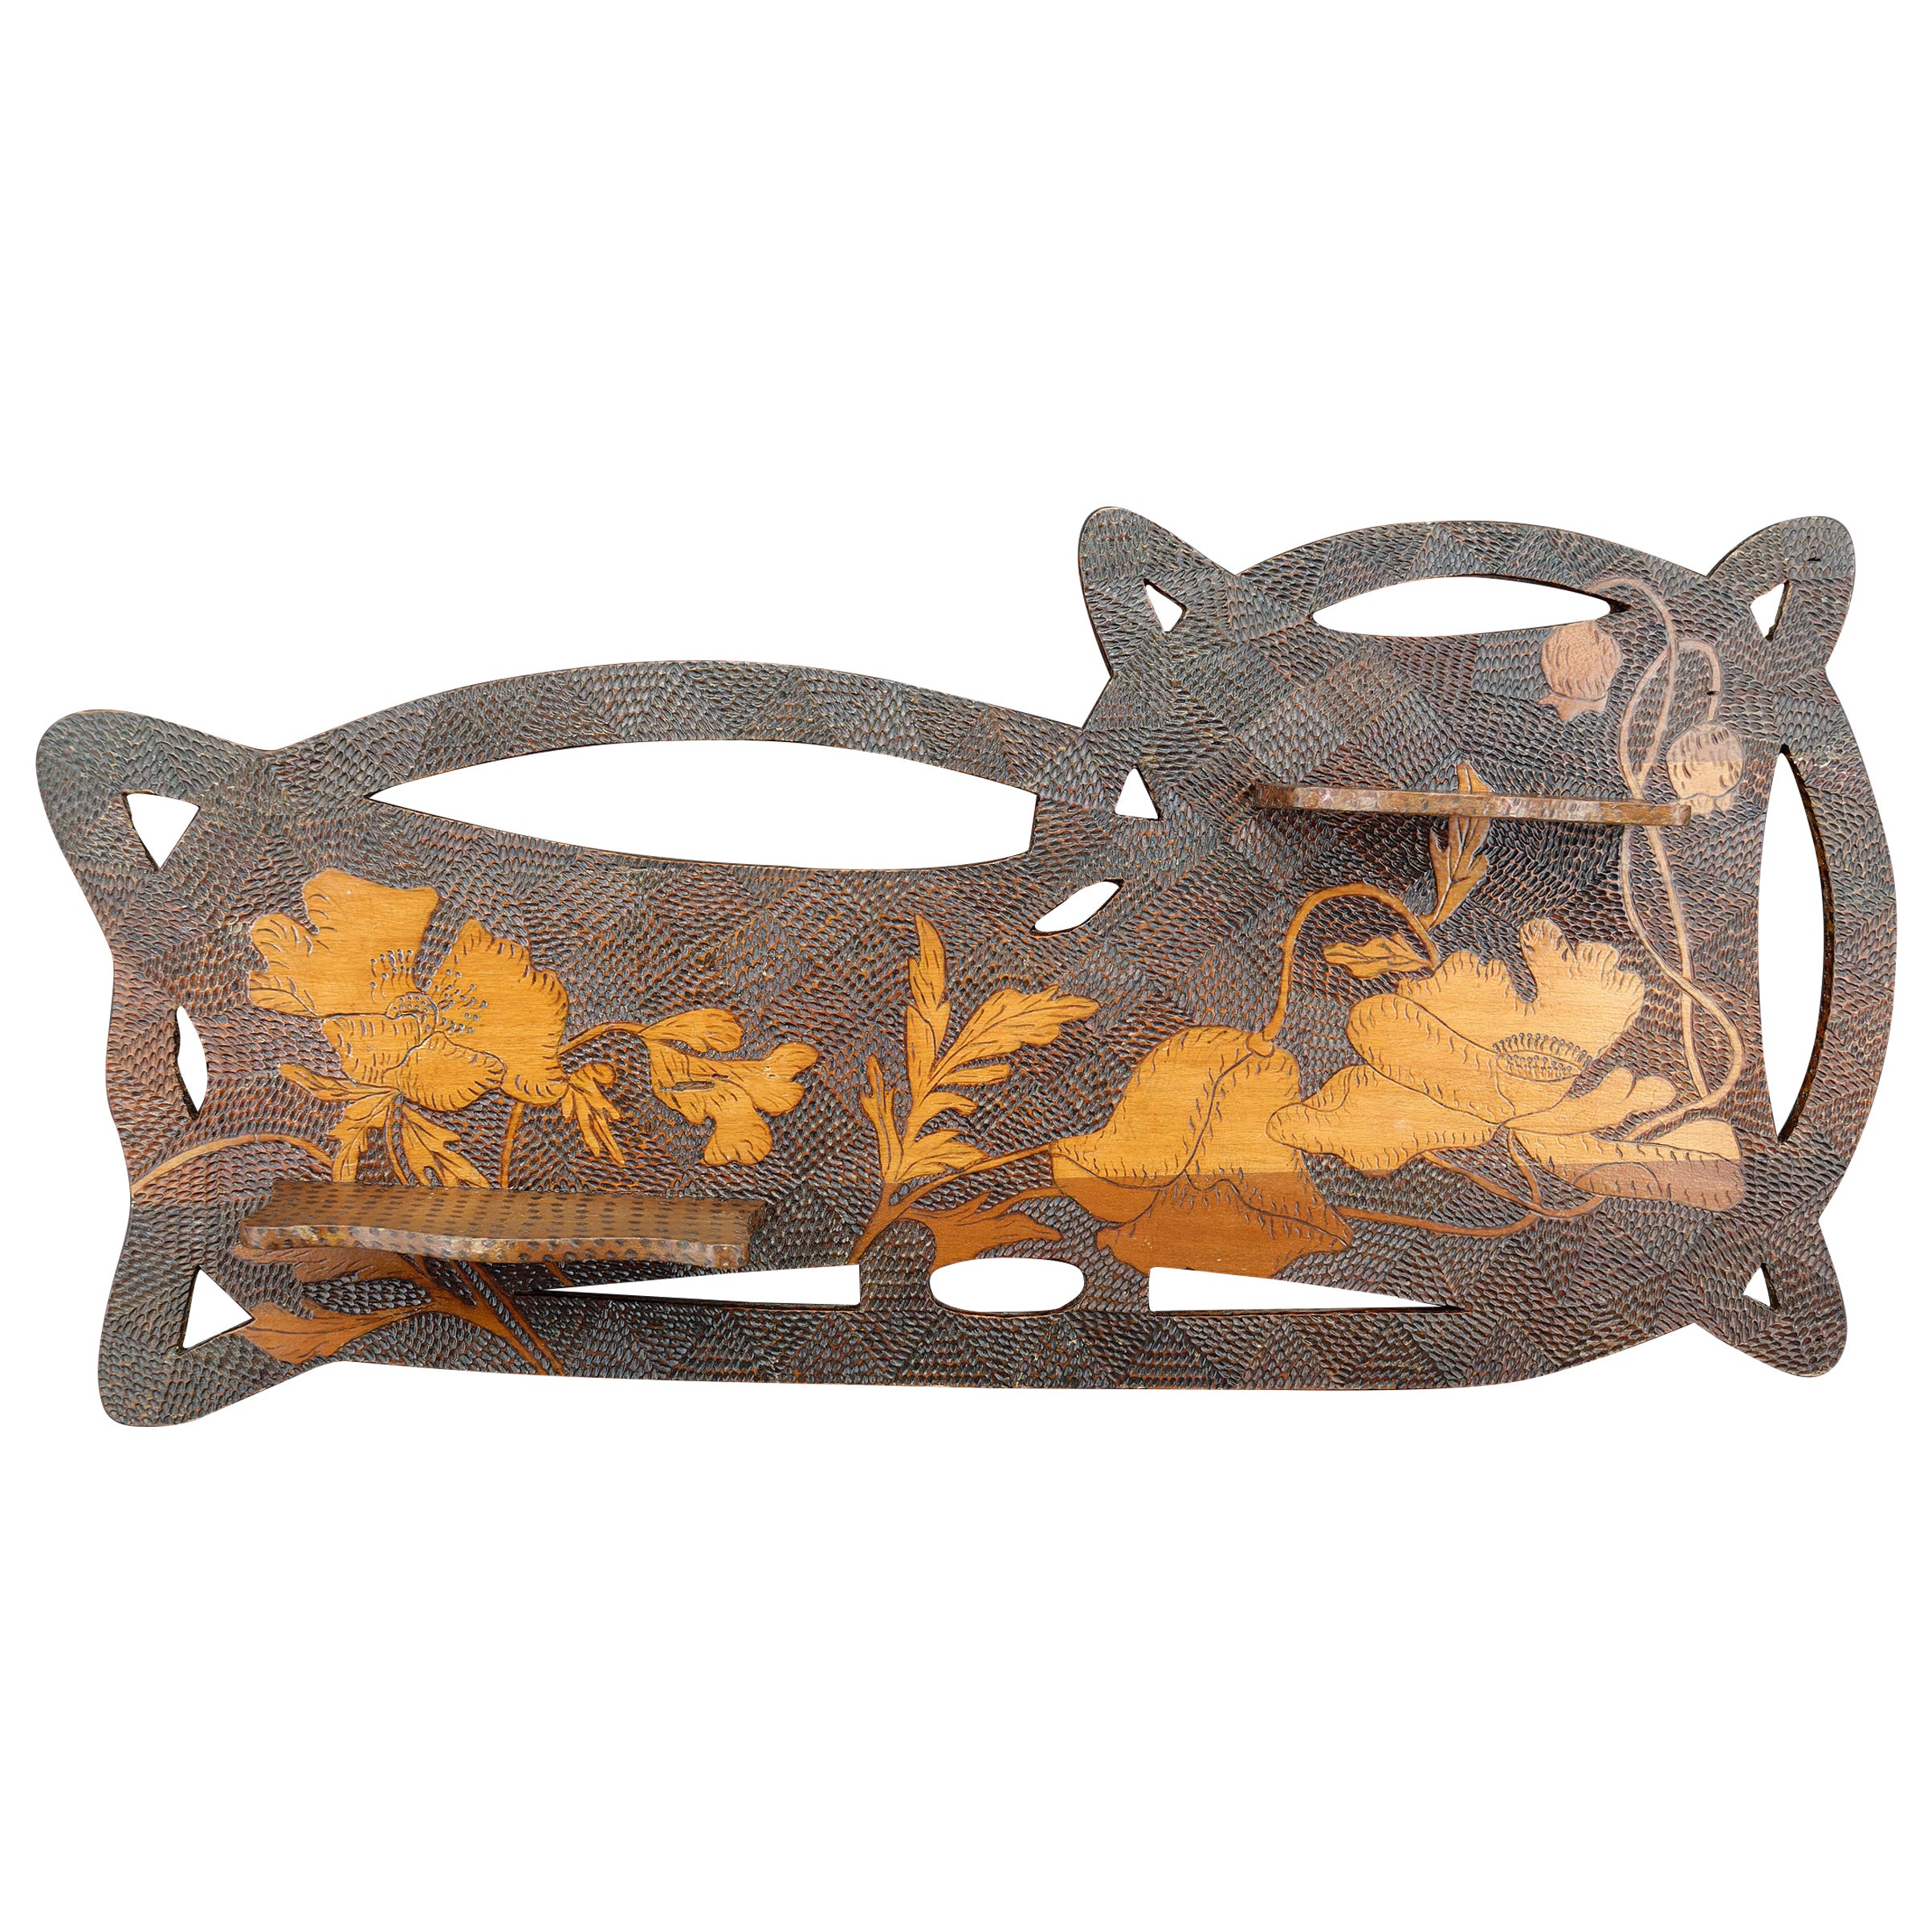 Art Nouveau wall shelf with poppies, France, circa 1900